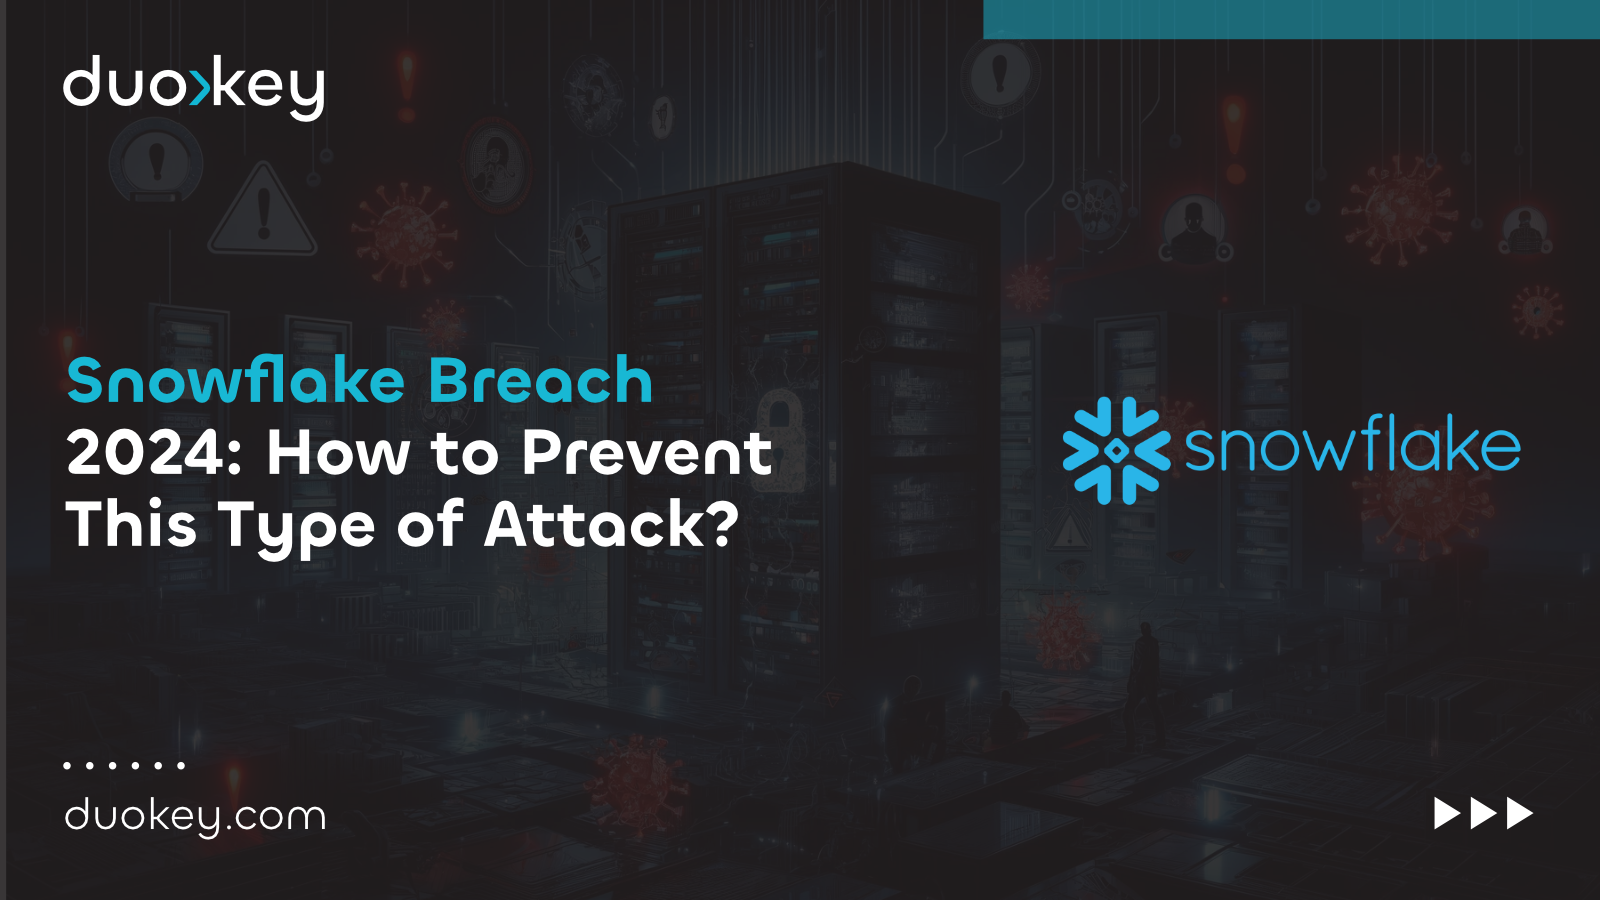 Snowflake Breach 2024: How to Prevent This Type of Attack?